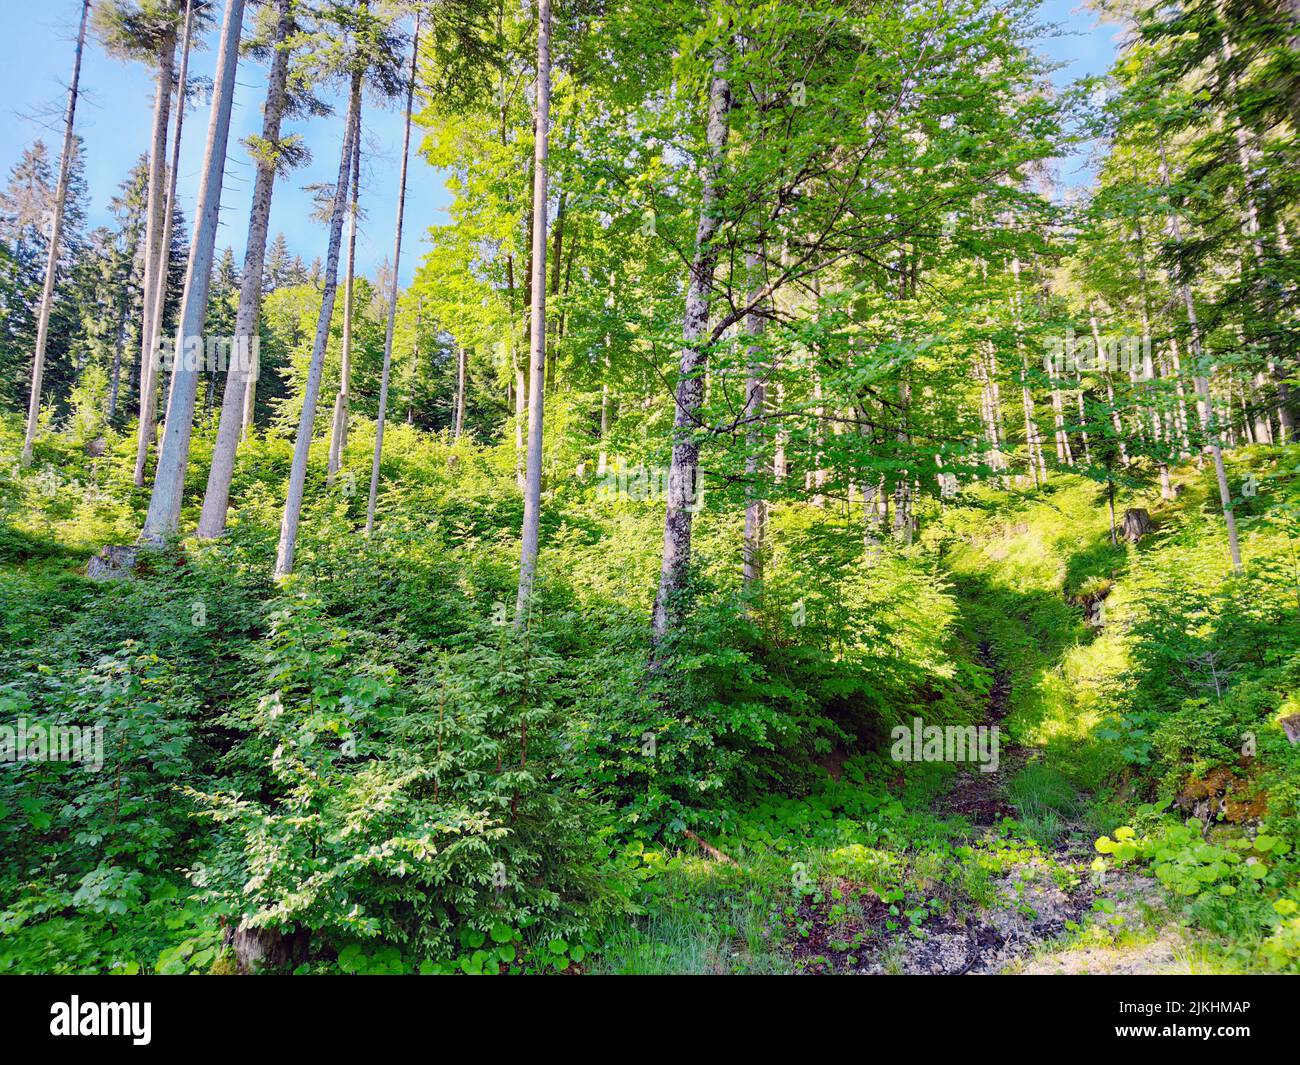 Mountain forest, mixed forest, undergrowth, wet forest floor Stock Photo